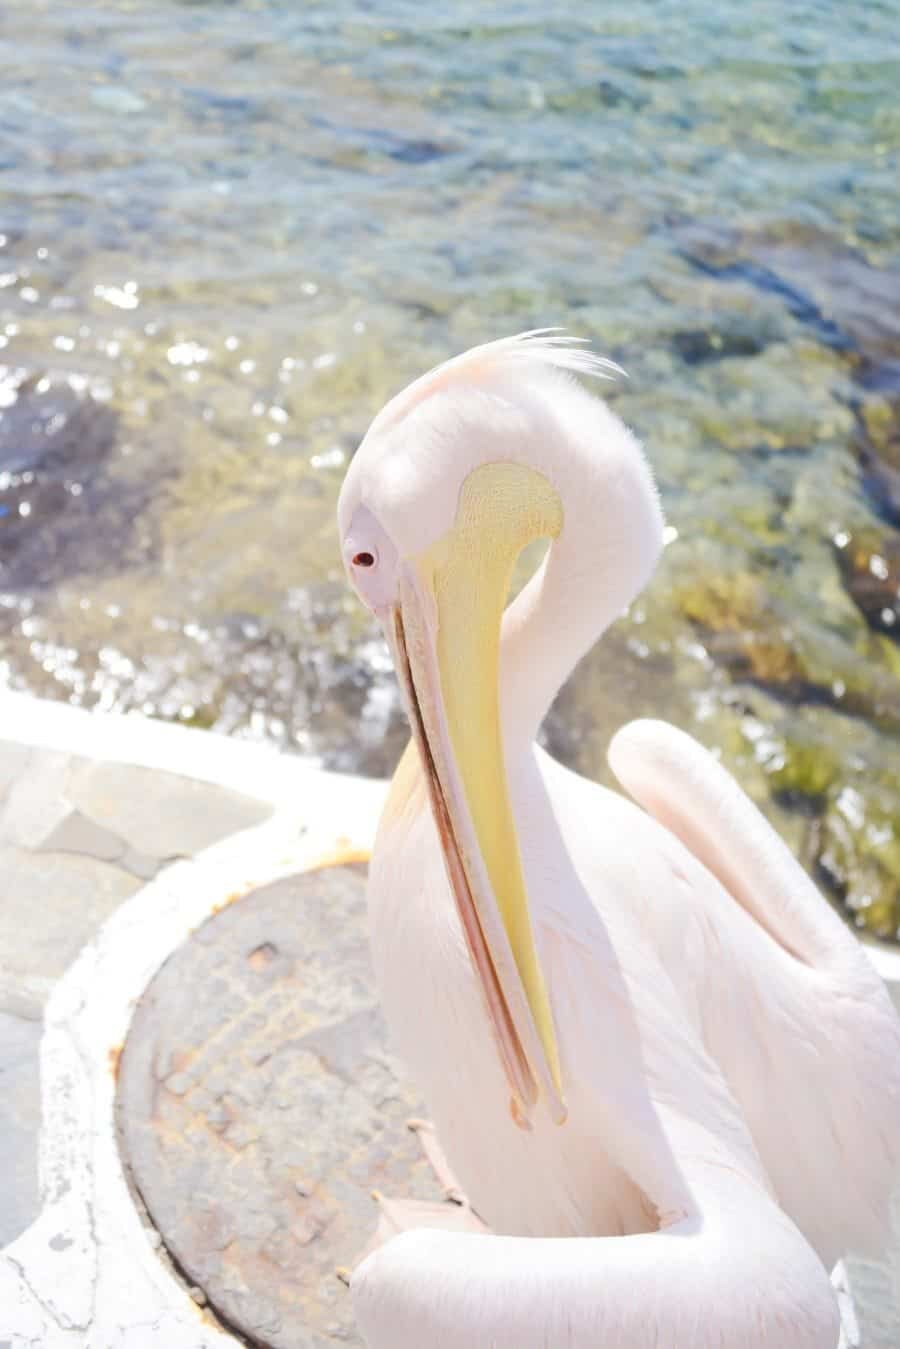 Mykonos Petros the Pelican - The Best photography locations by The Wandering Lens